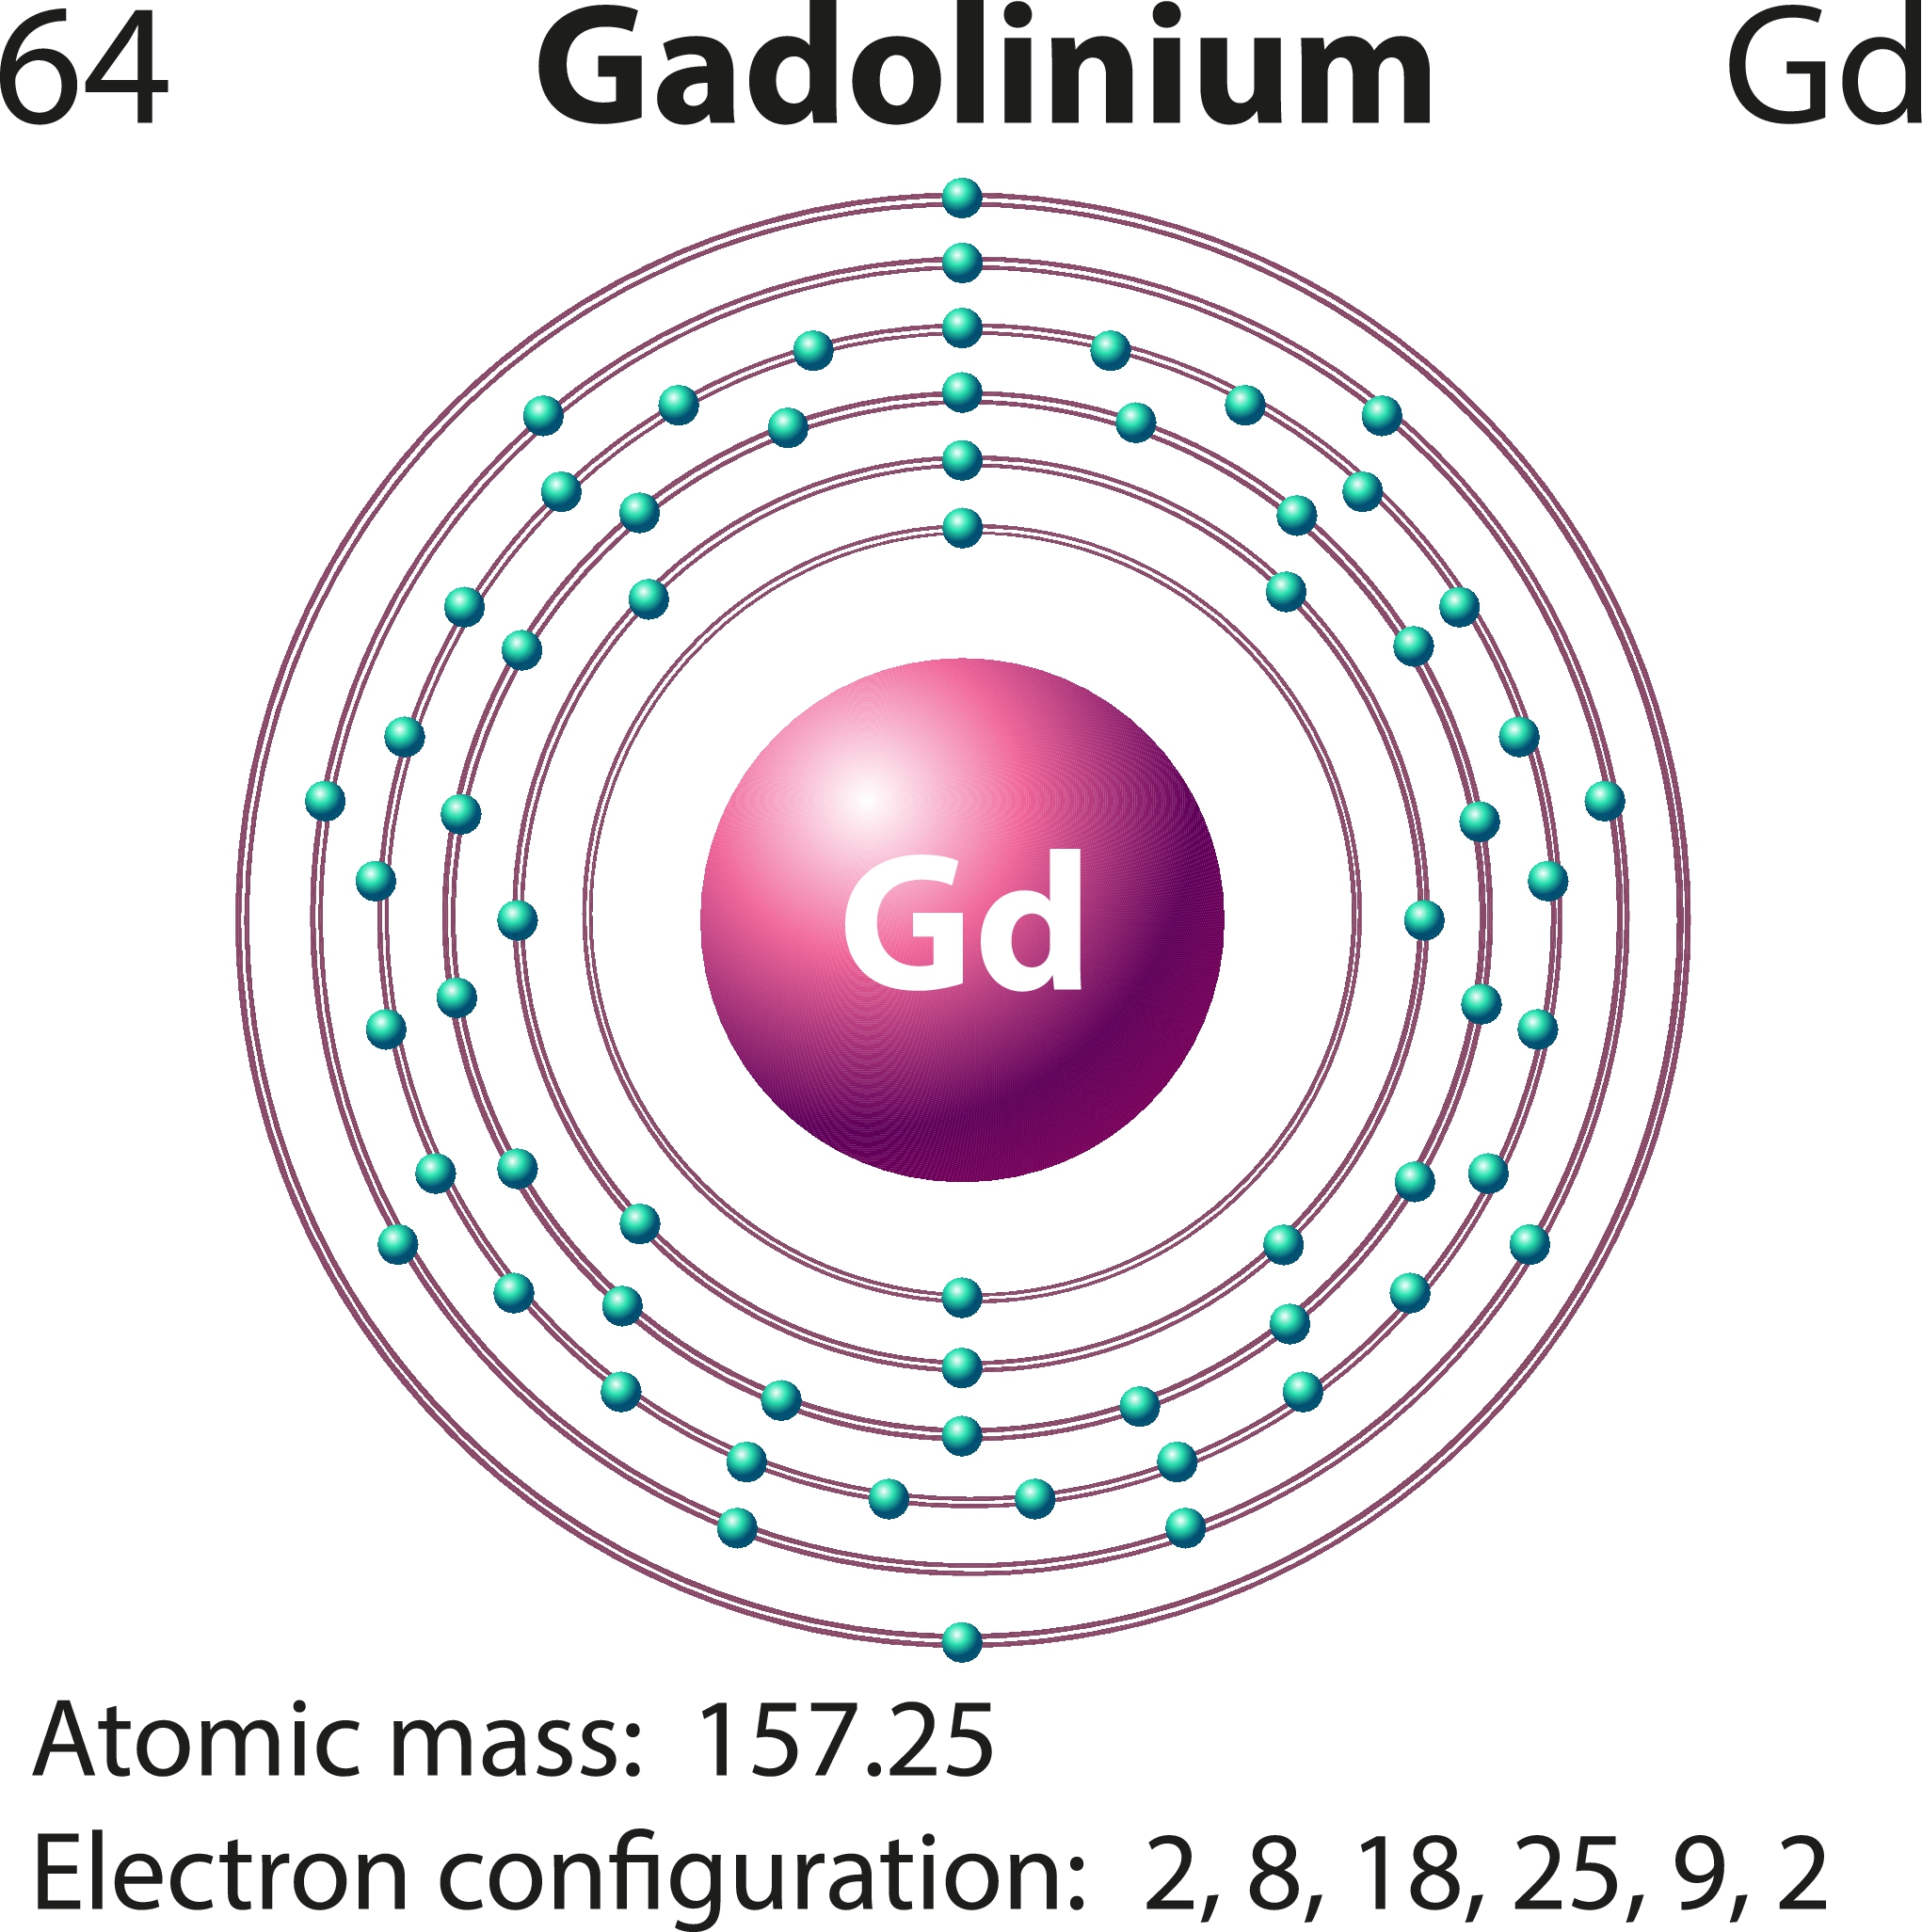 Using gadolinium (contrast agent used in MRI scans) may revolutionize the application of Nuclear Magnetic Resonance spectroscopy as a tool for more comprehensive and useful analysis of urine samples (Image: Colourbox.)